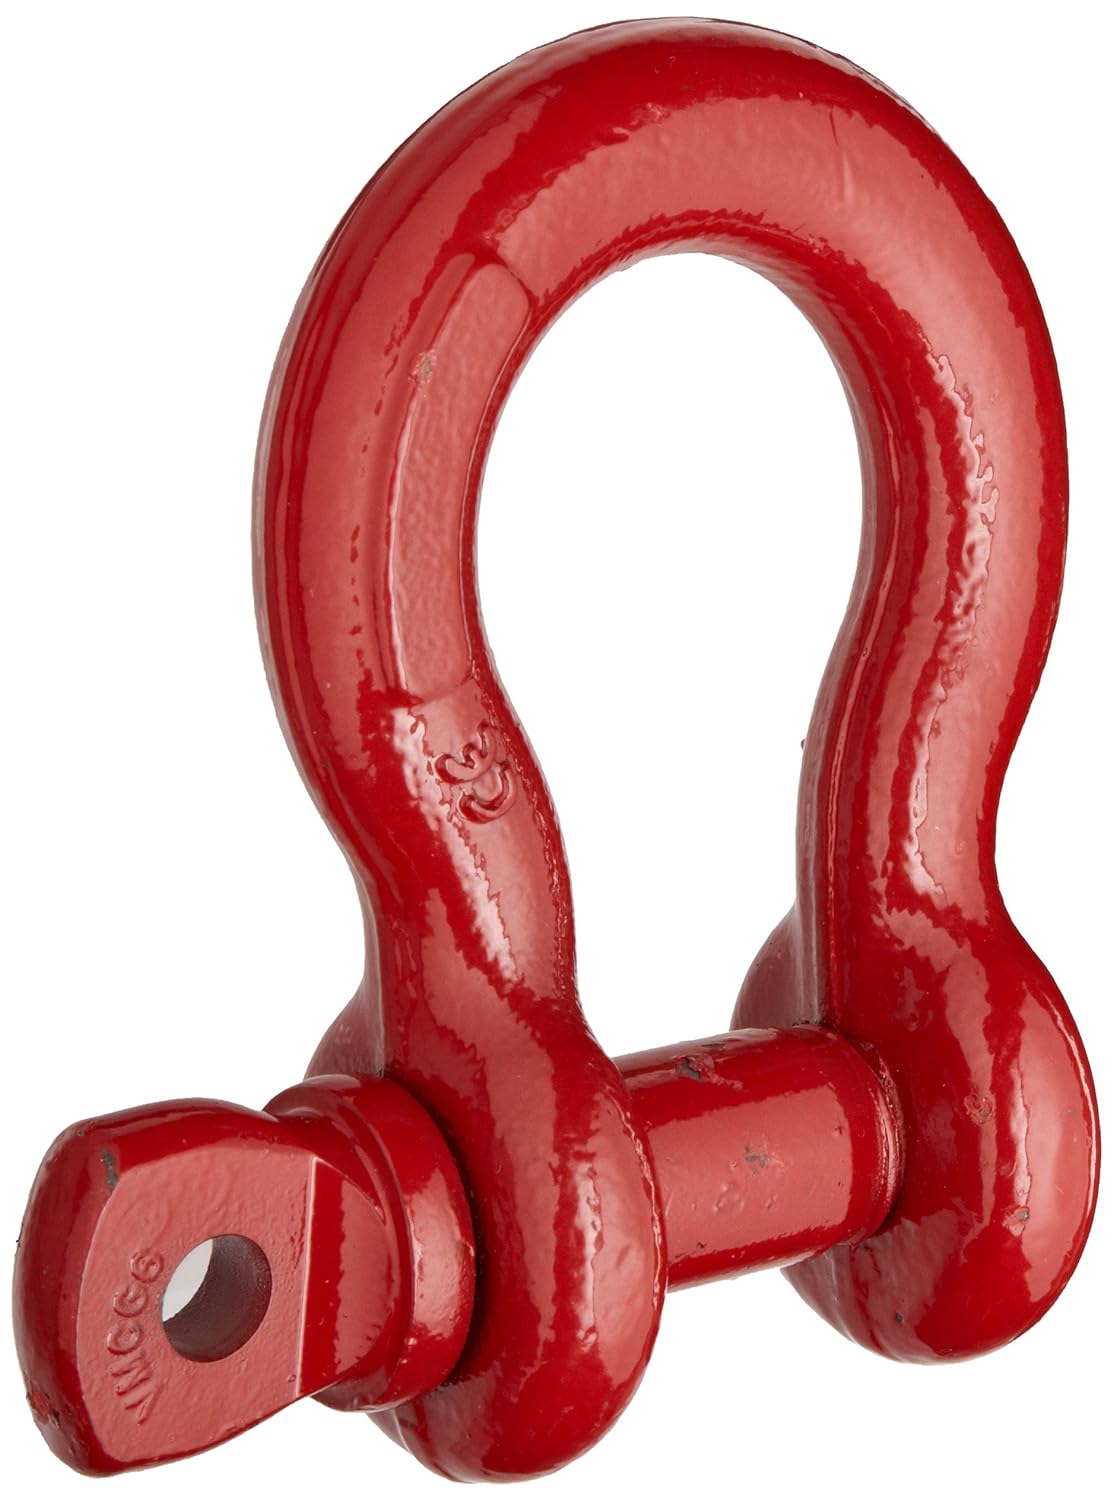 Crosby 1018525 Carbon Steel S-209 Screw Pin Anchor Shackle, Self-Colored, 6-1/2 Ton WLL, 7/8" Size